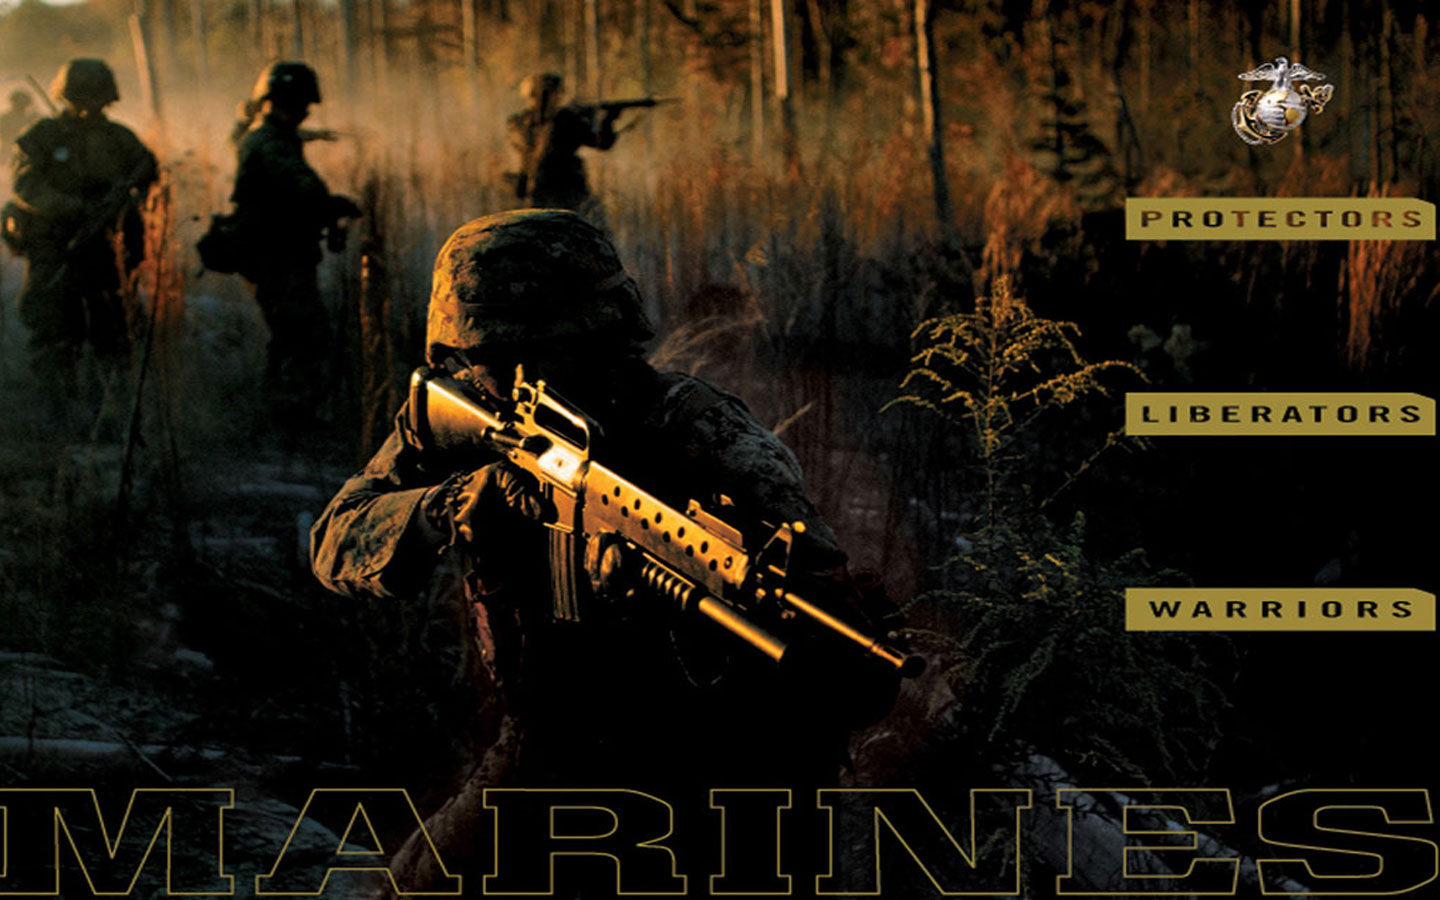 the few the proud the marines background